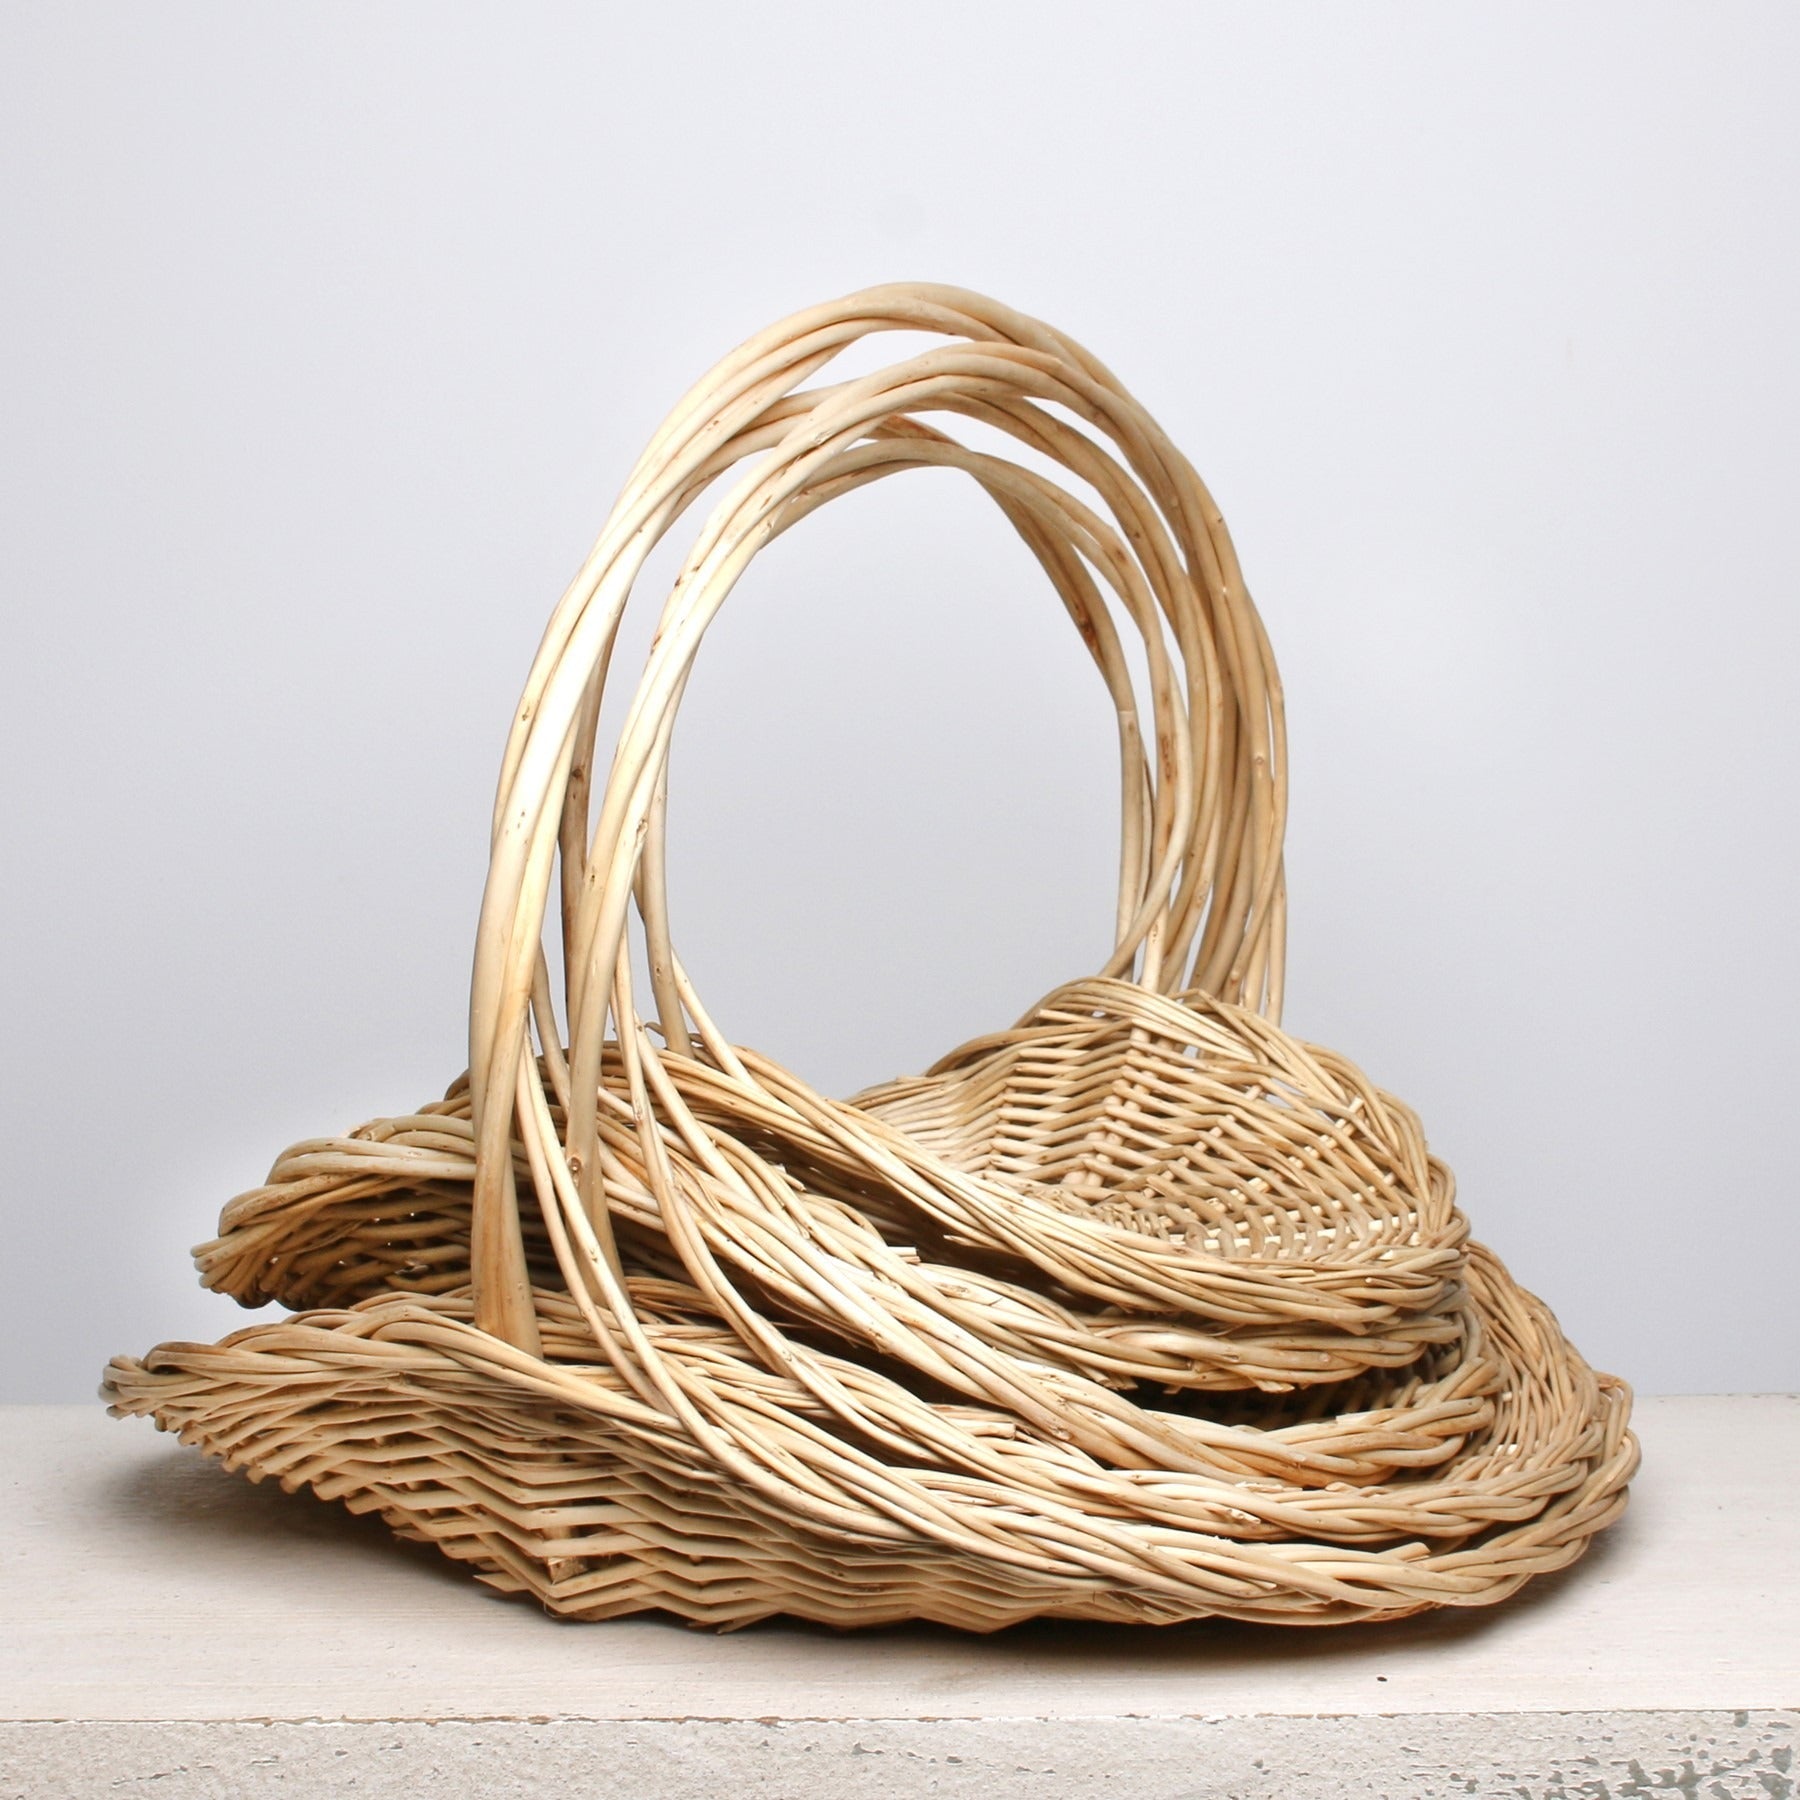 View Willow Display Basket with Handle Set of 5 information